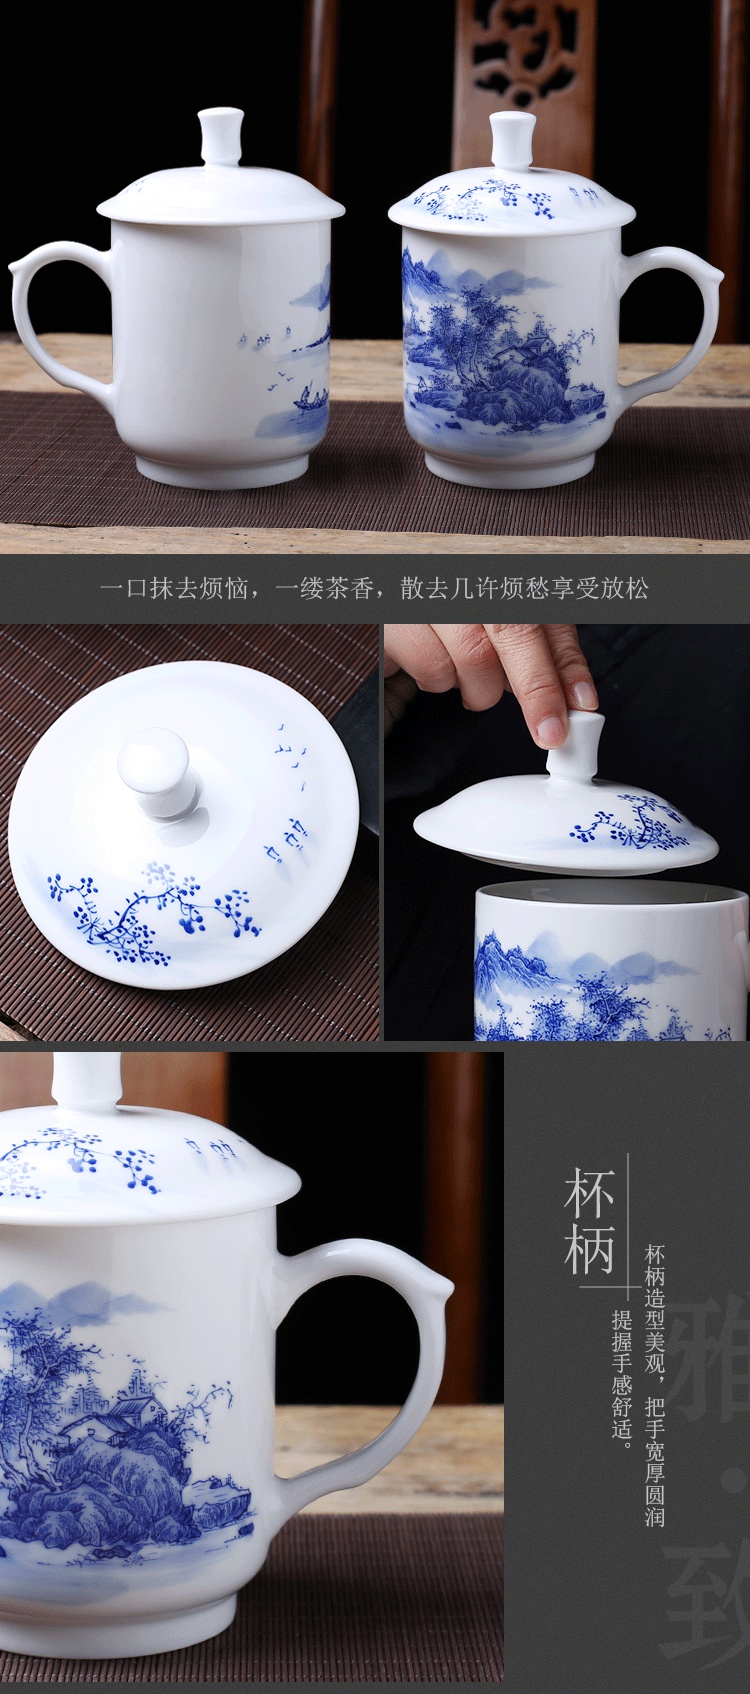 . Poly real jingdezhen hand - made ceramic household business scene large capacity with the cover of blue and white porcelain cup single office mercifully